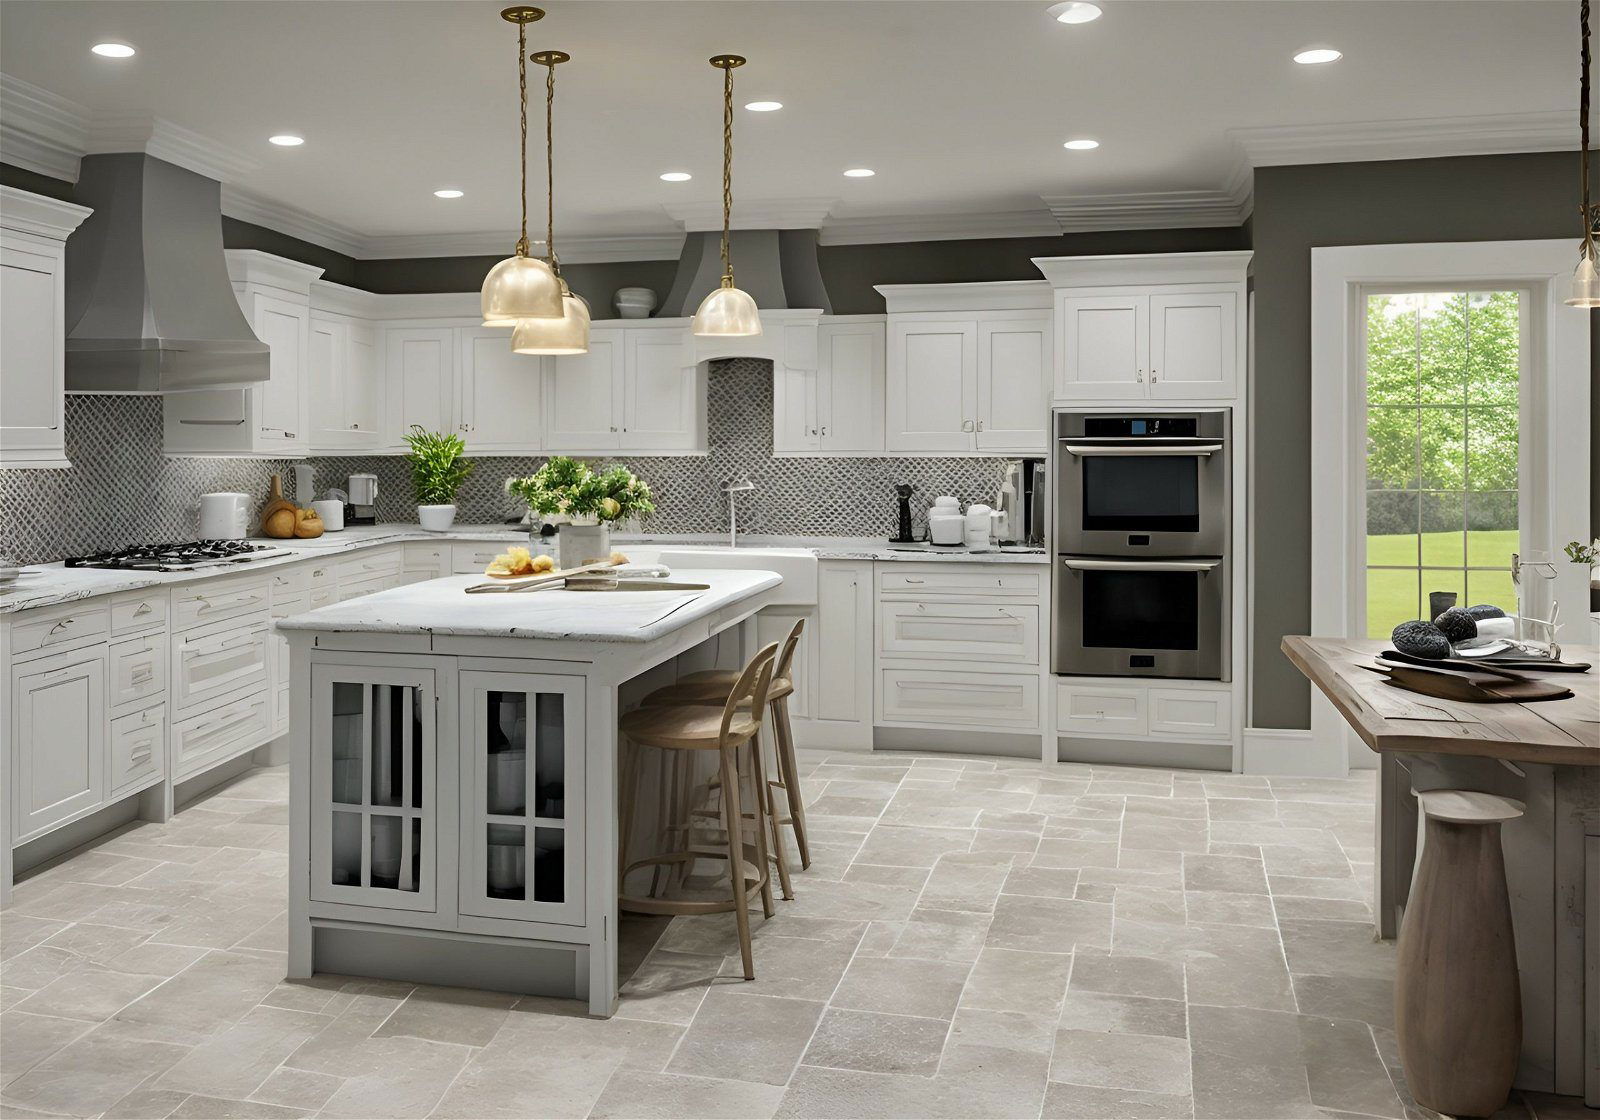 Photo of a modern kitchen with a spacious center island